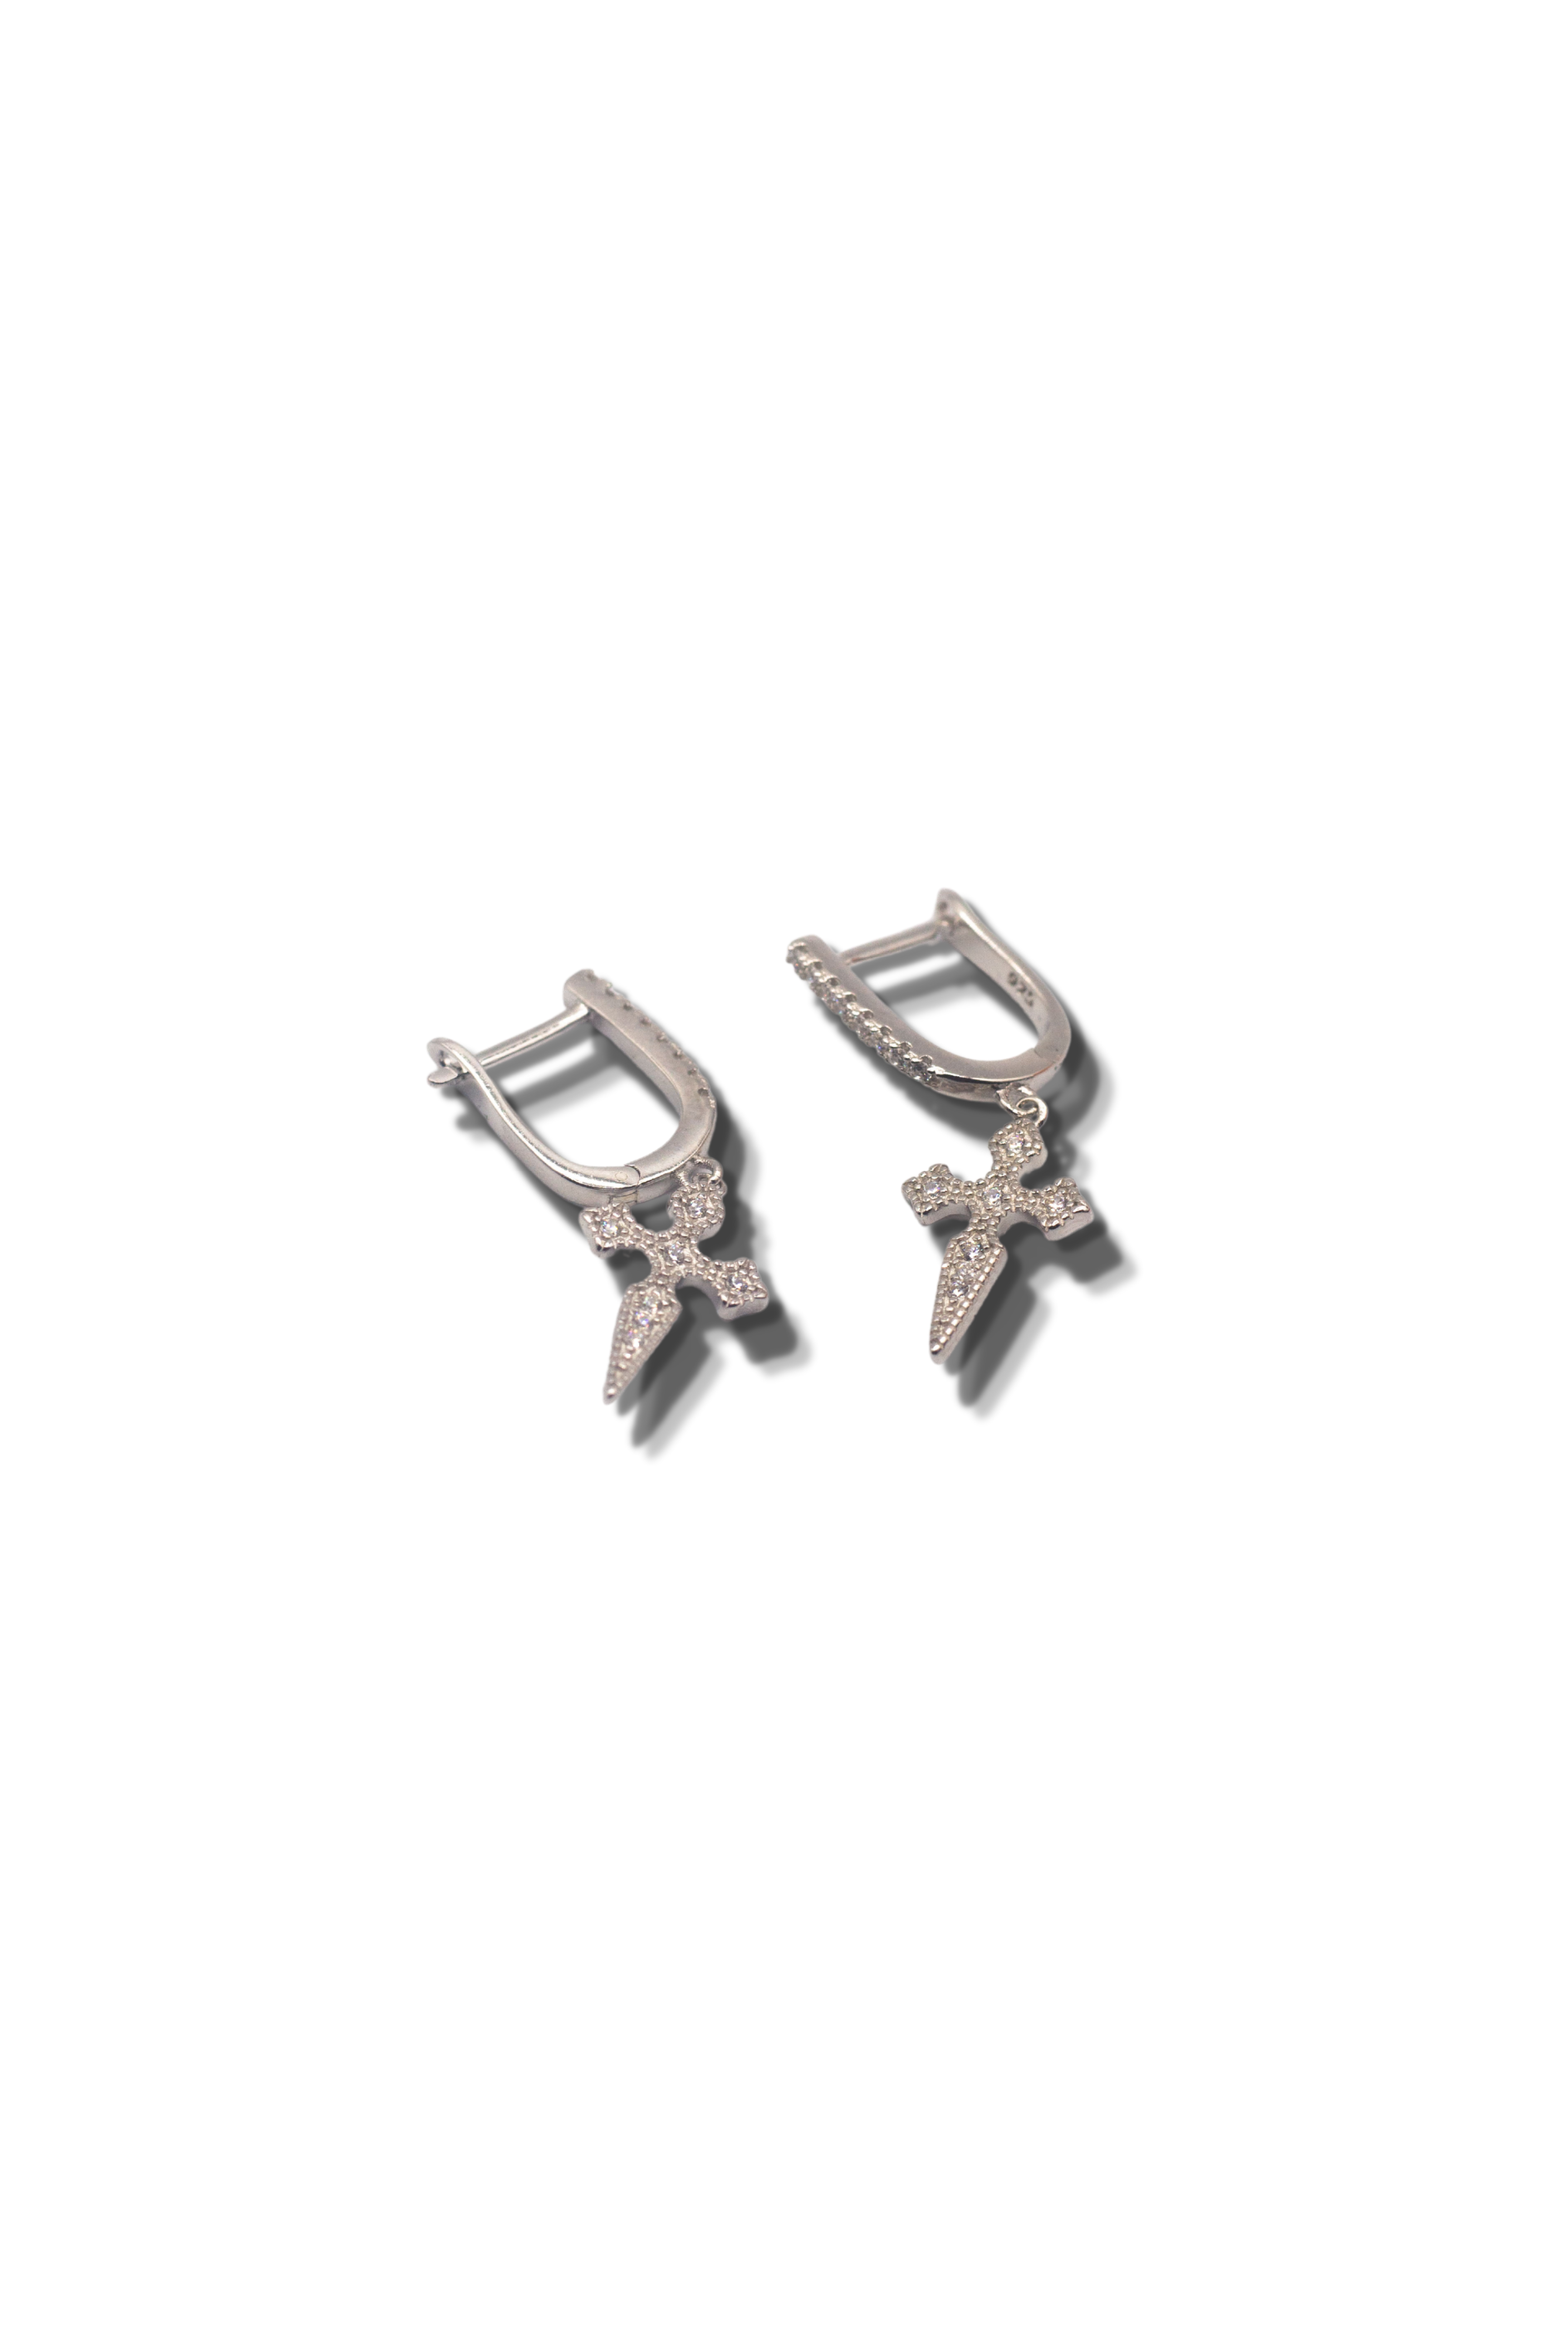 18k silver stainless steel earrings. The earrings have cross charms attached. Cross Cubic Zirconia Huggies by E's Element.